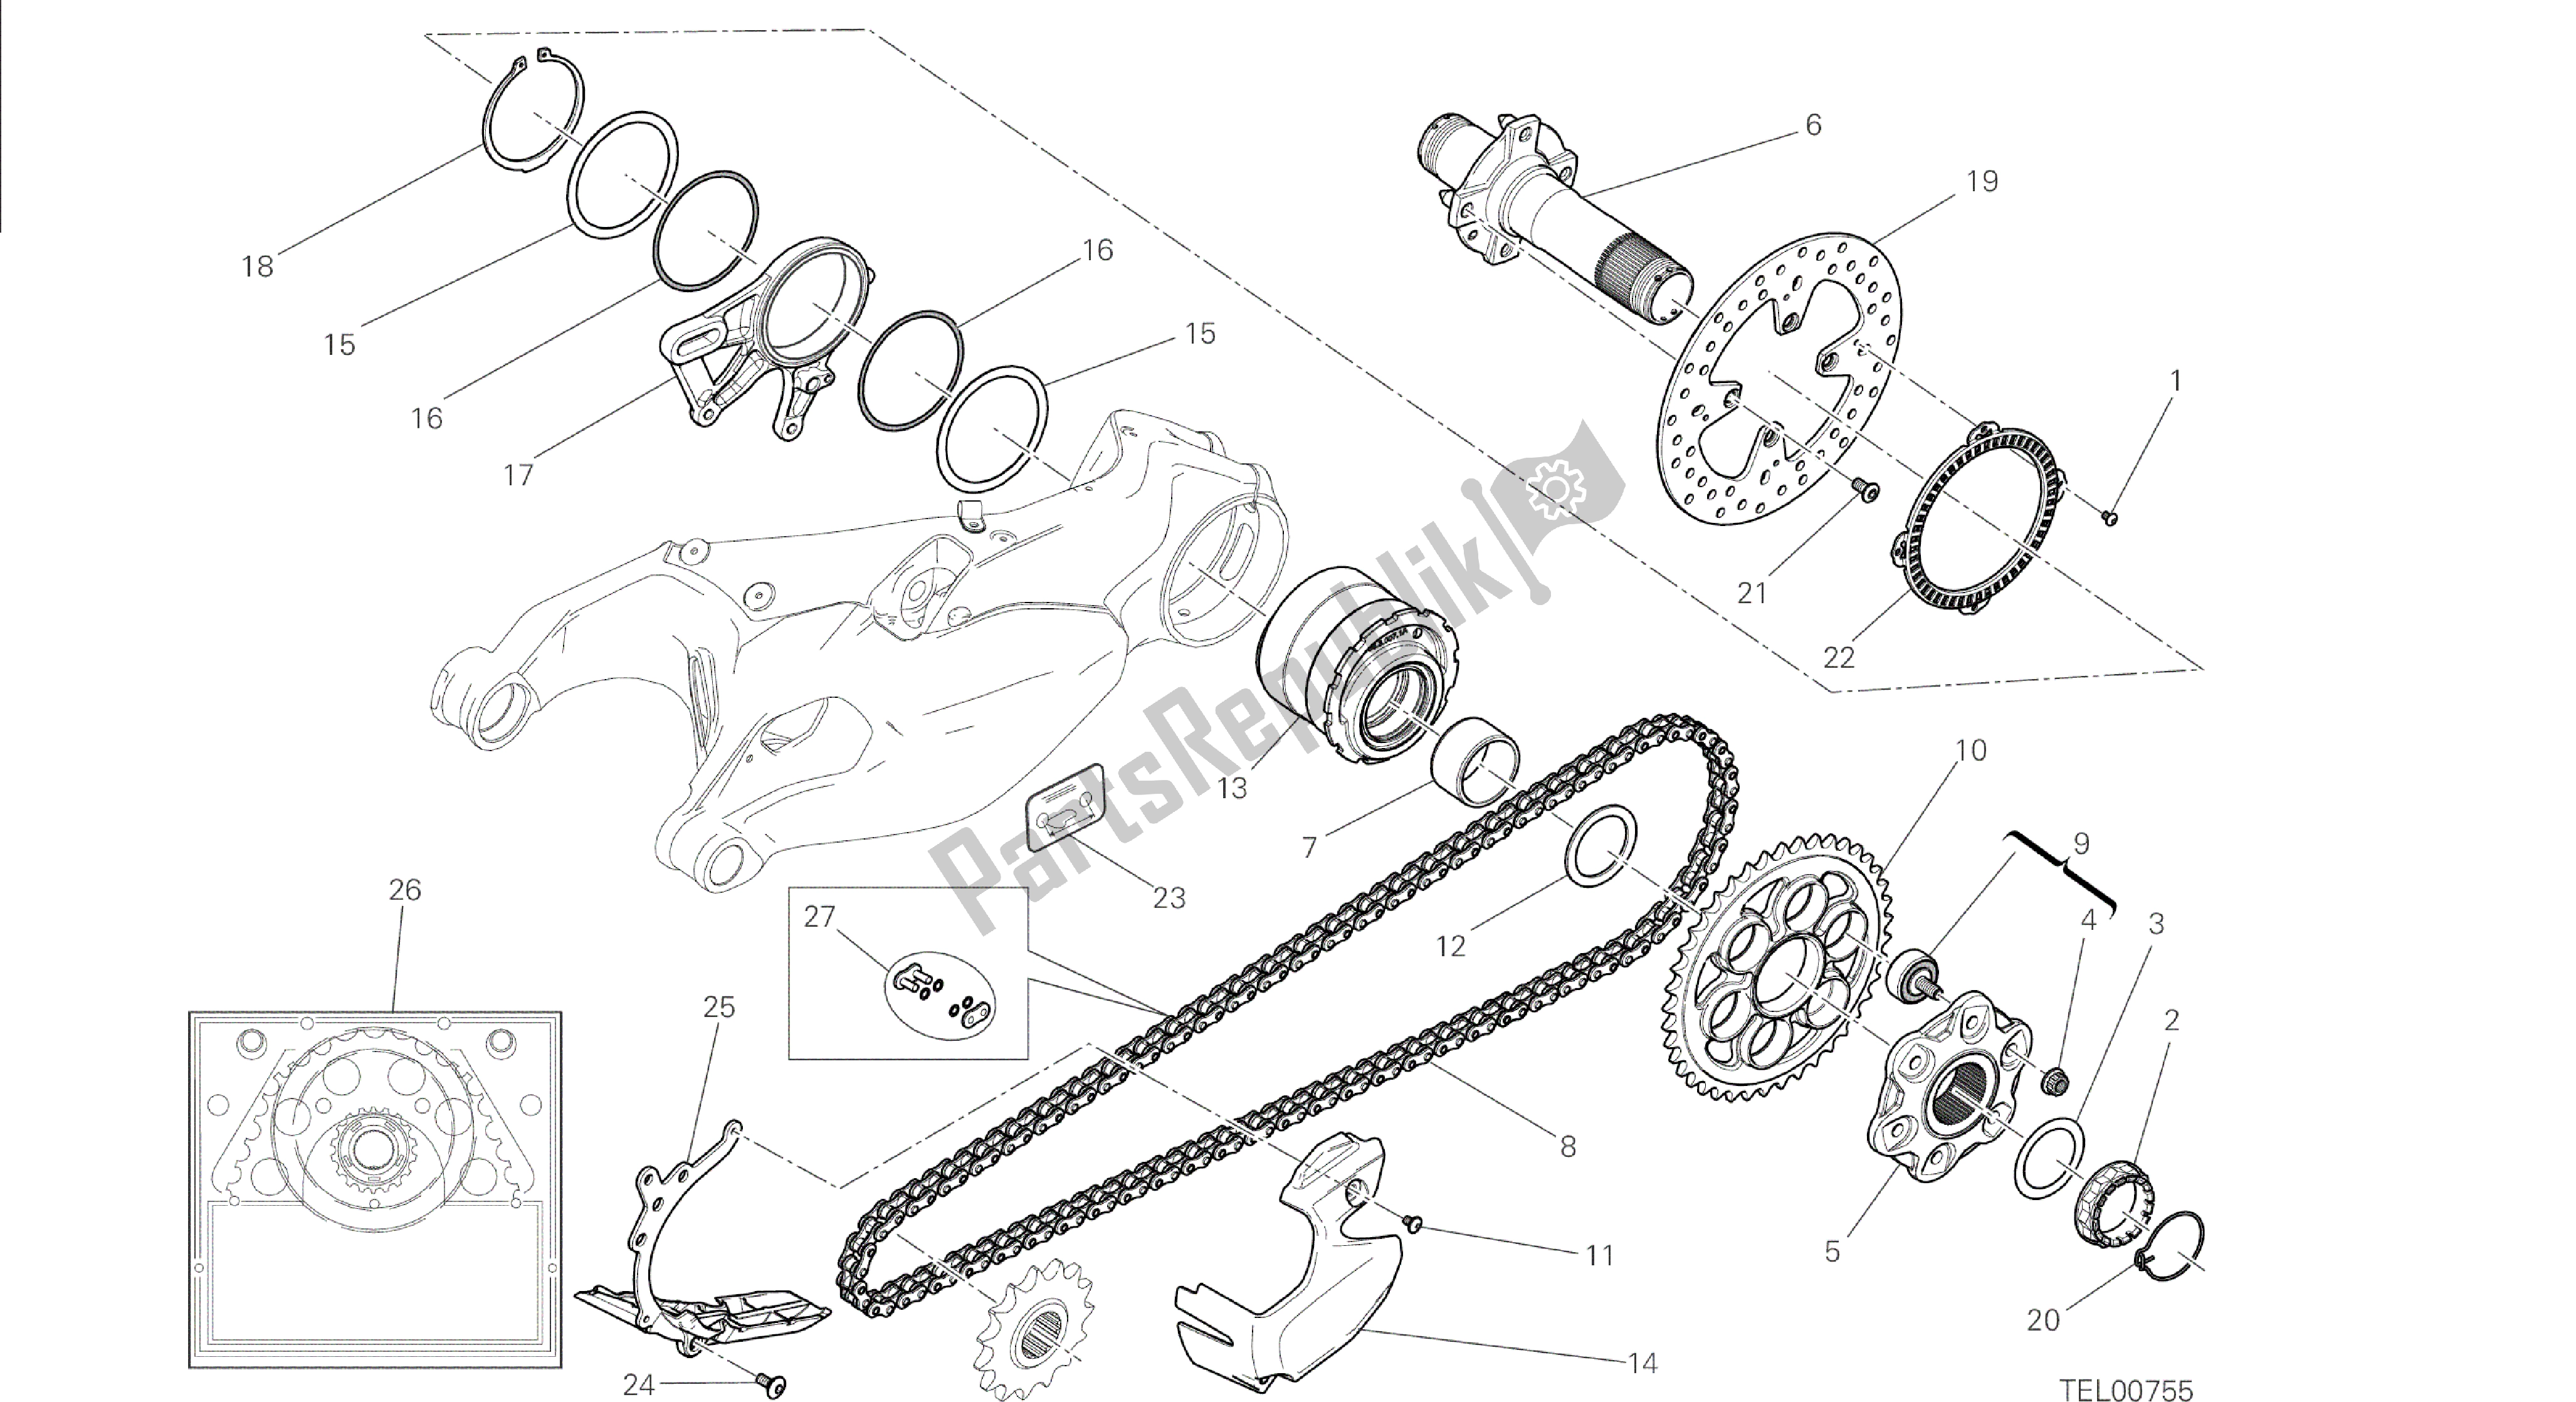 All parts for the Drawing 26a - Rear Wheel Spindle [mod:1299;xst:aus,eur,fra,jap,twn]group Frame of the Ducati Panigale 1299 2015